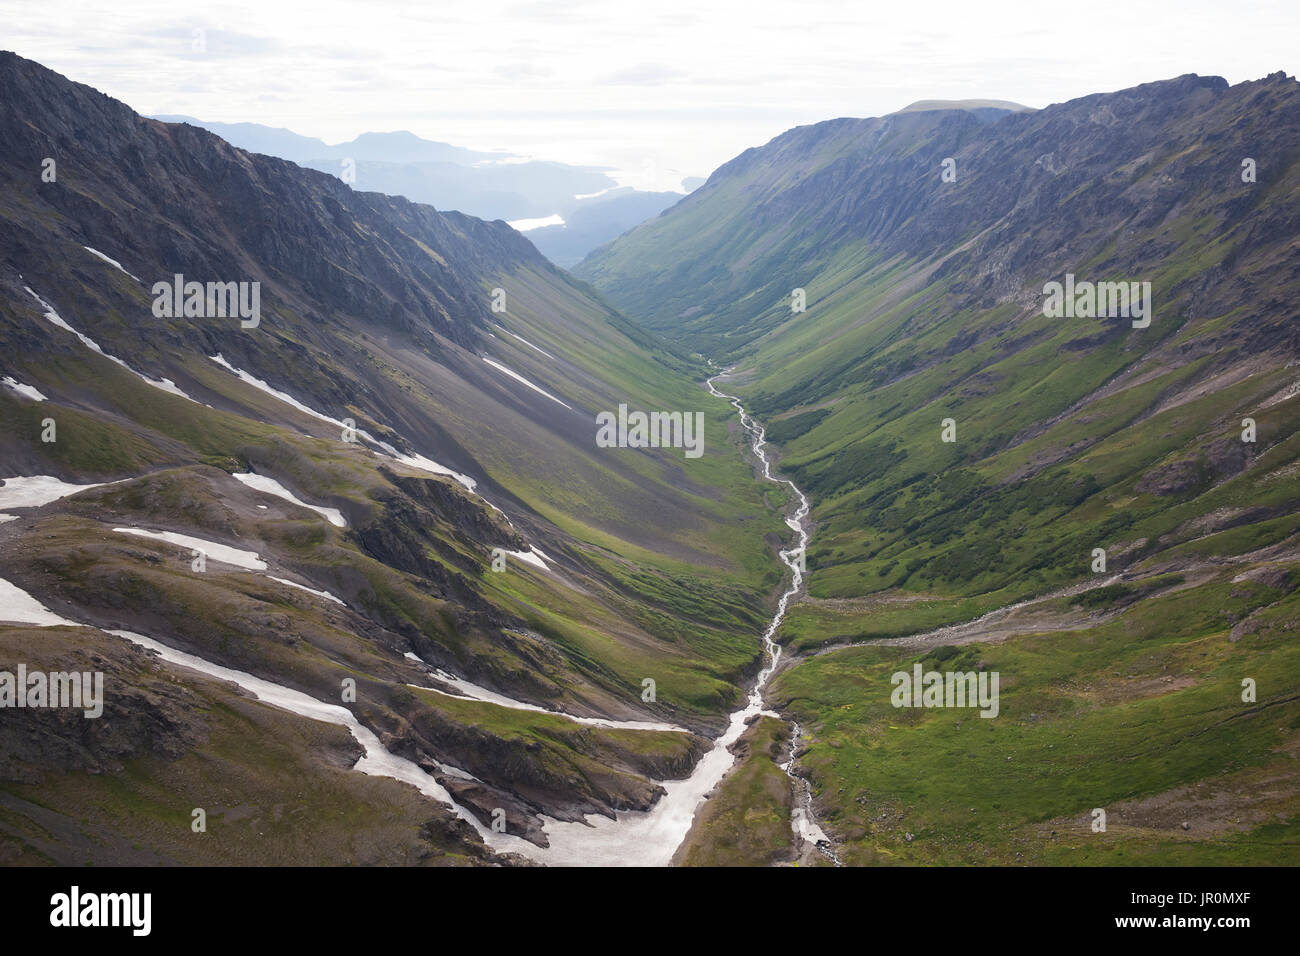 A River Running Through A Valley In The Kenai Mountains, Kachemak Bay State Park; Alaska, United States Of America Stock Photo